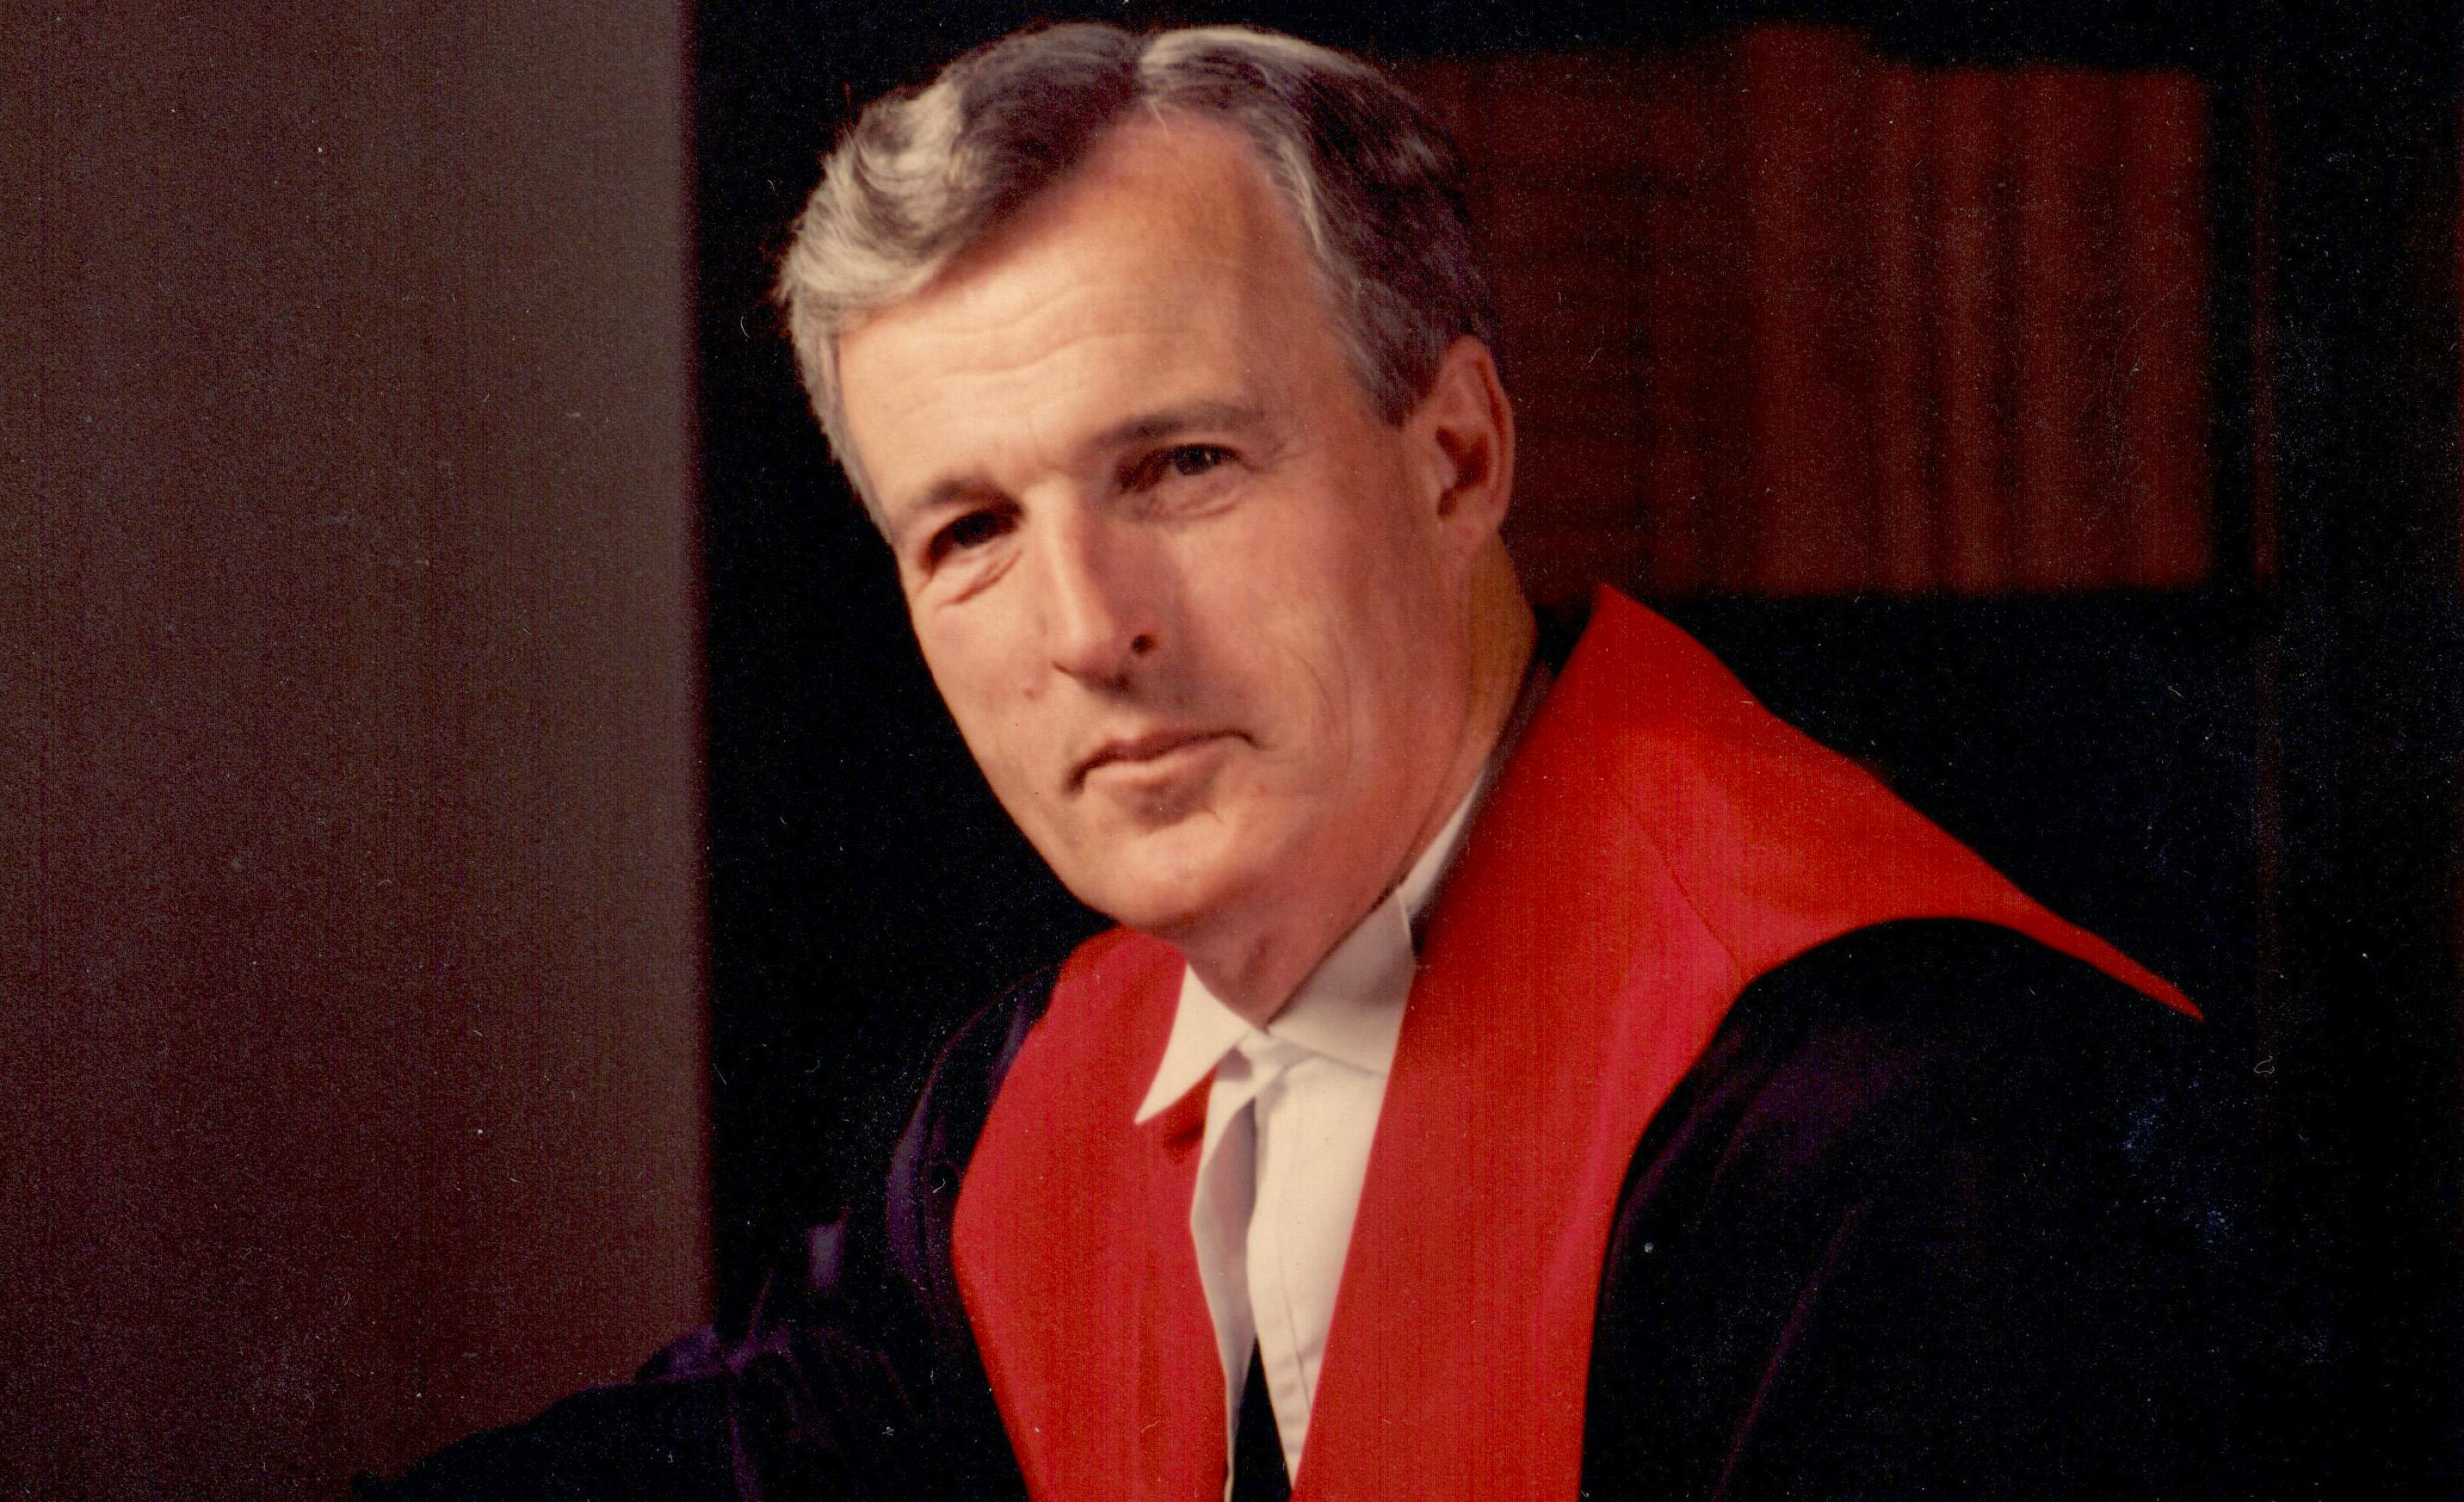 Former Justice of the Nova Scotia Supreme Court and provincial Conflict of Interest Commissioner D. Merlin Nunn died on Thursday, May 21, 2020. he was 89.